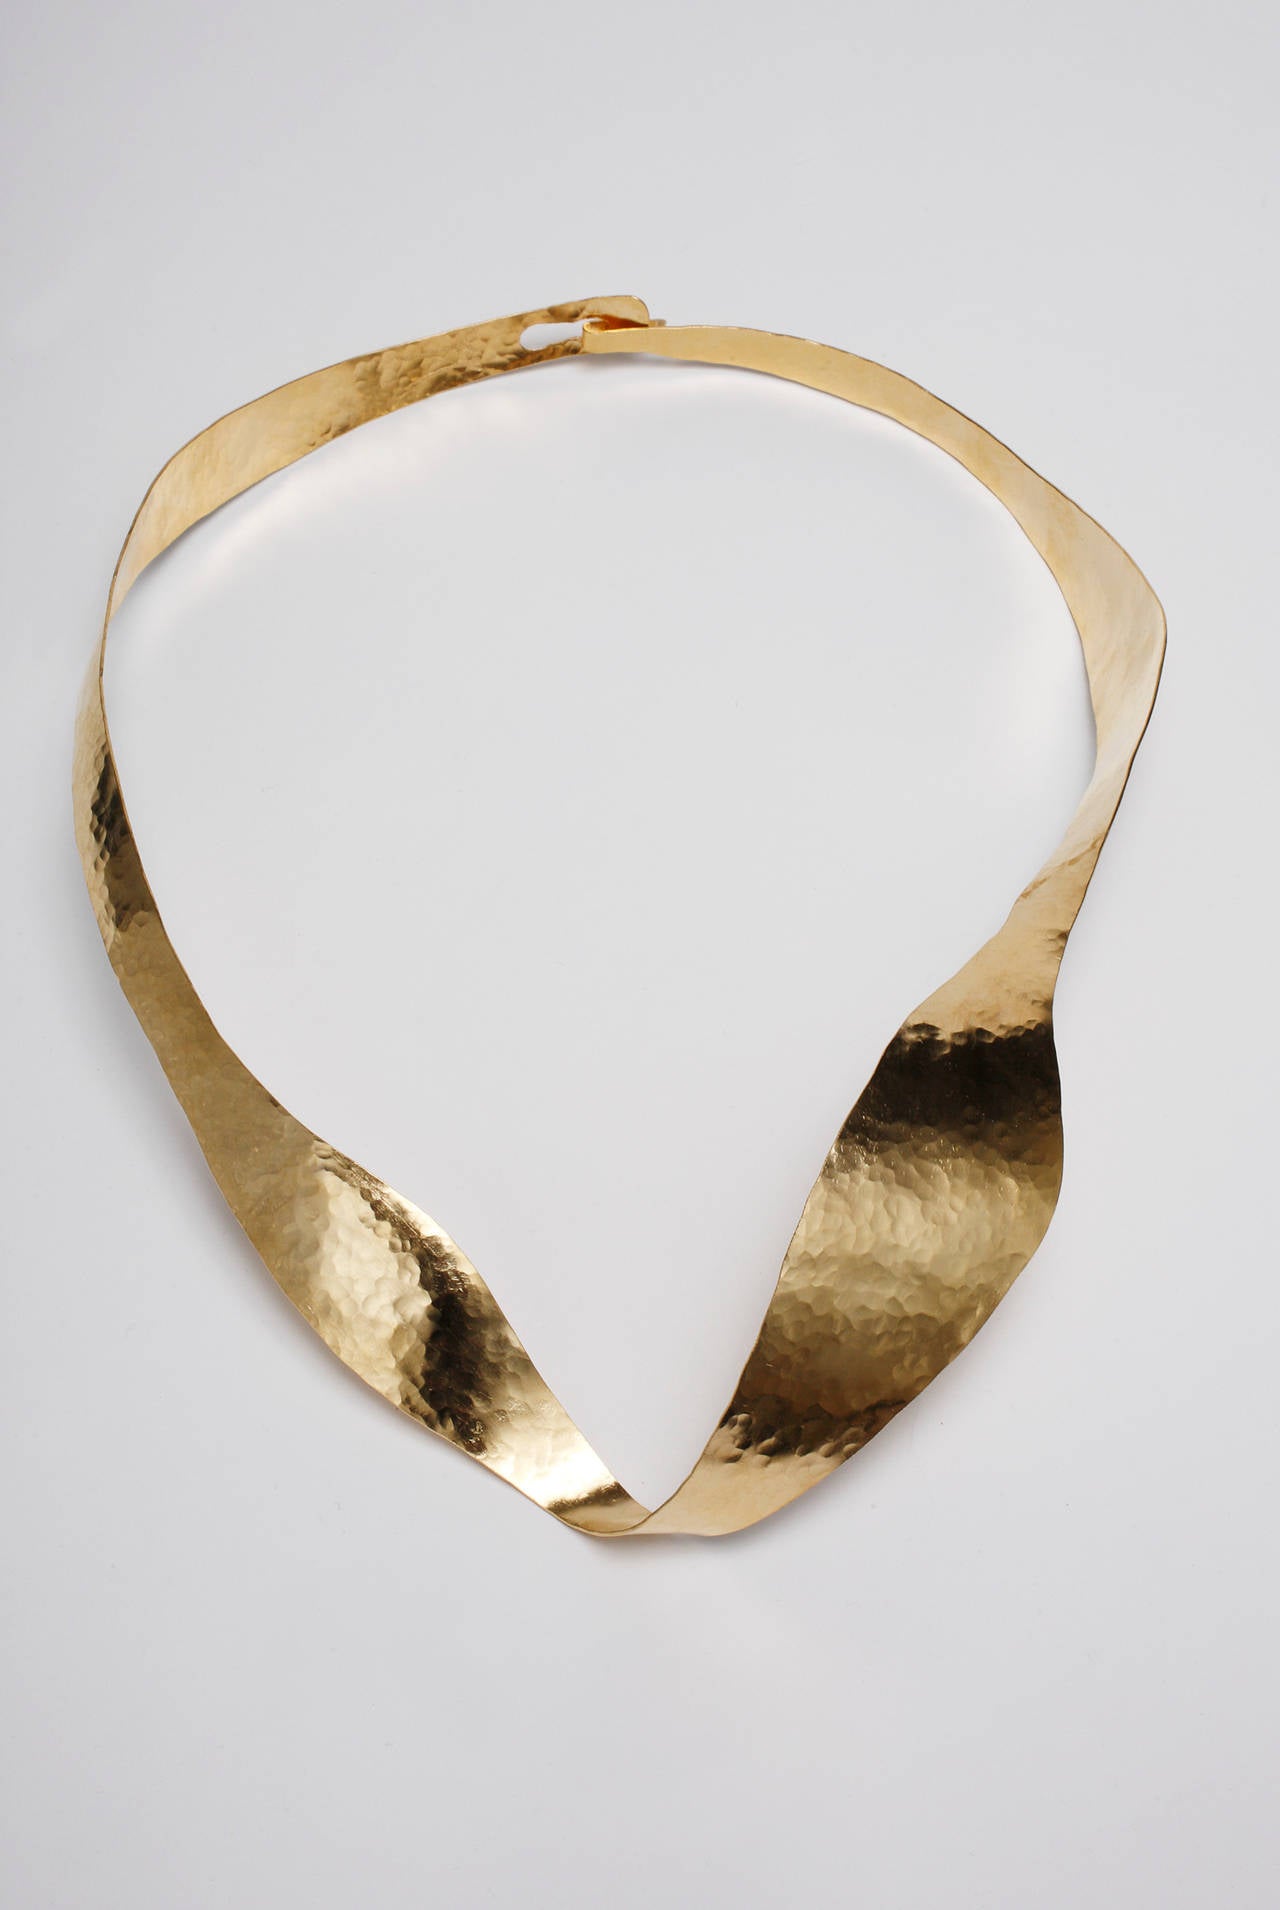 This splendid piece of jewelry like all of Jarrige's work perfectly captures movement. It undulates with serenity and beauty.

This necklace is hand-sculpted and hand-hammered in brass, gold plated with 18-karat gold (three